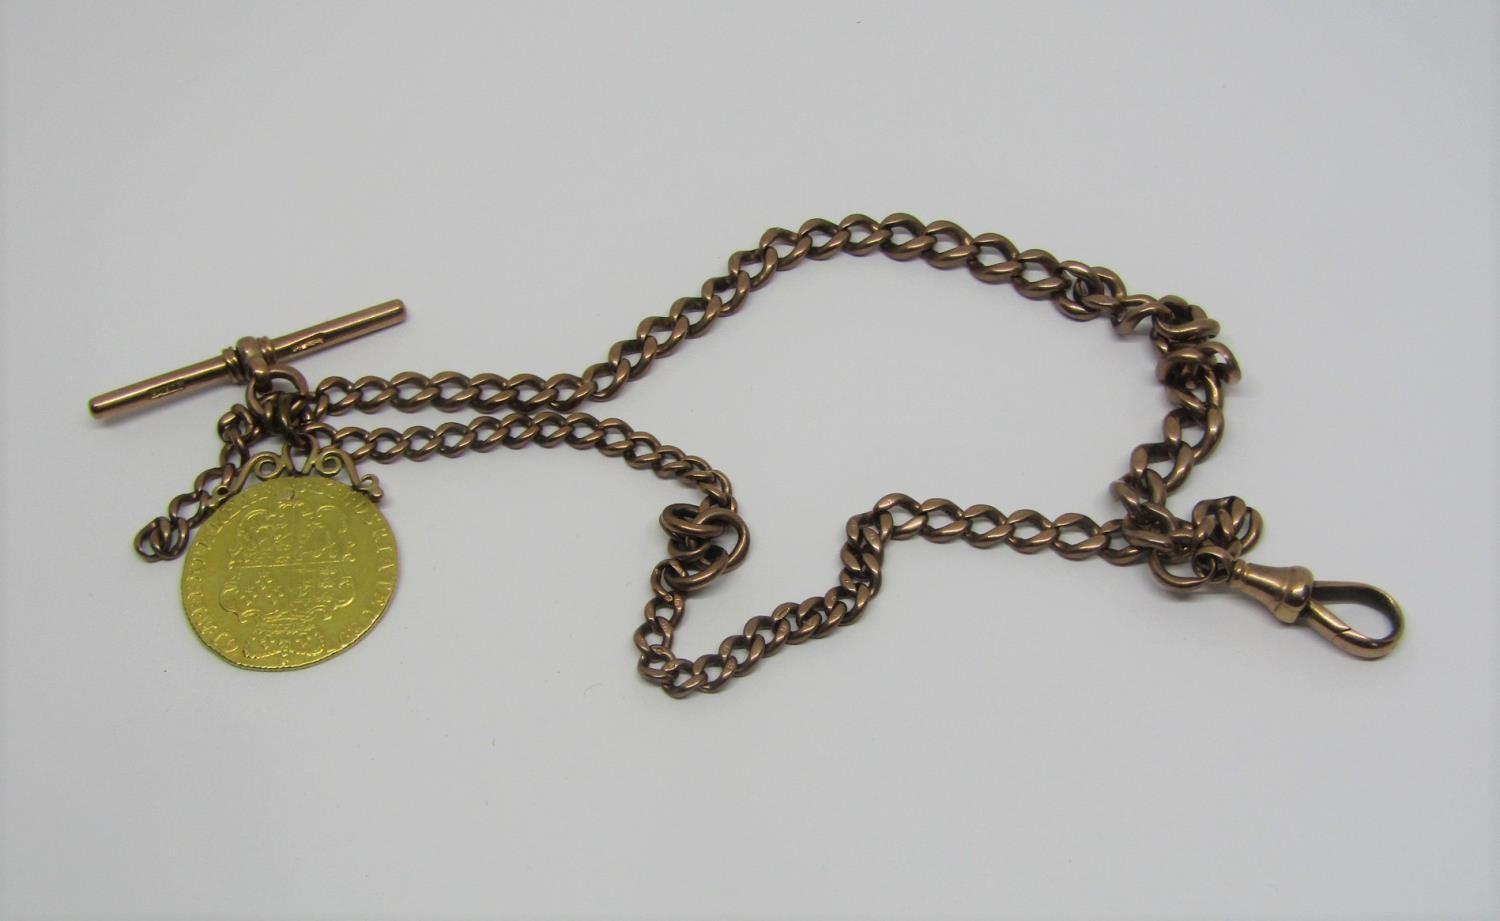 9ct Albert chain with T-bar, hung with a George III 1761 guinea, 38.5g